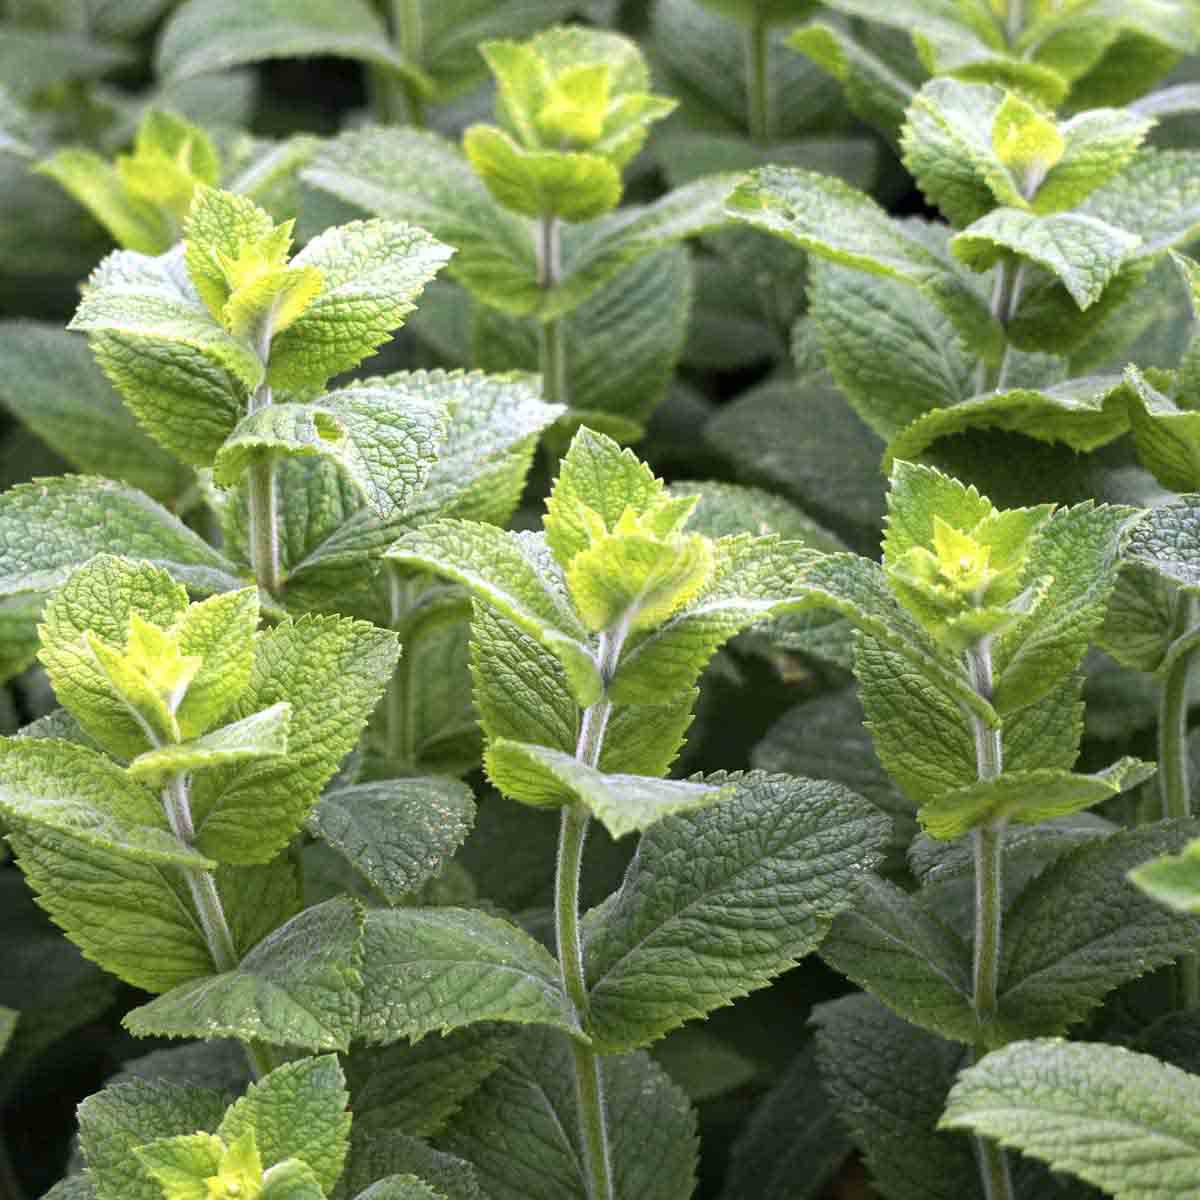 many mint plants growing together.